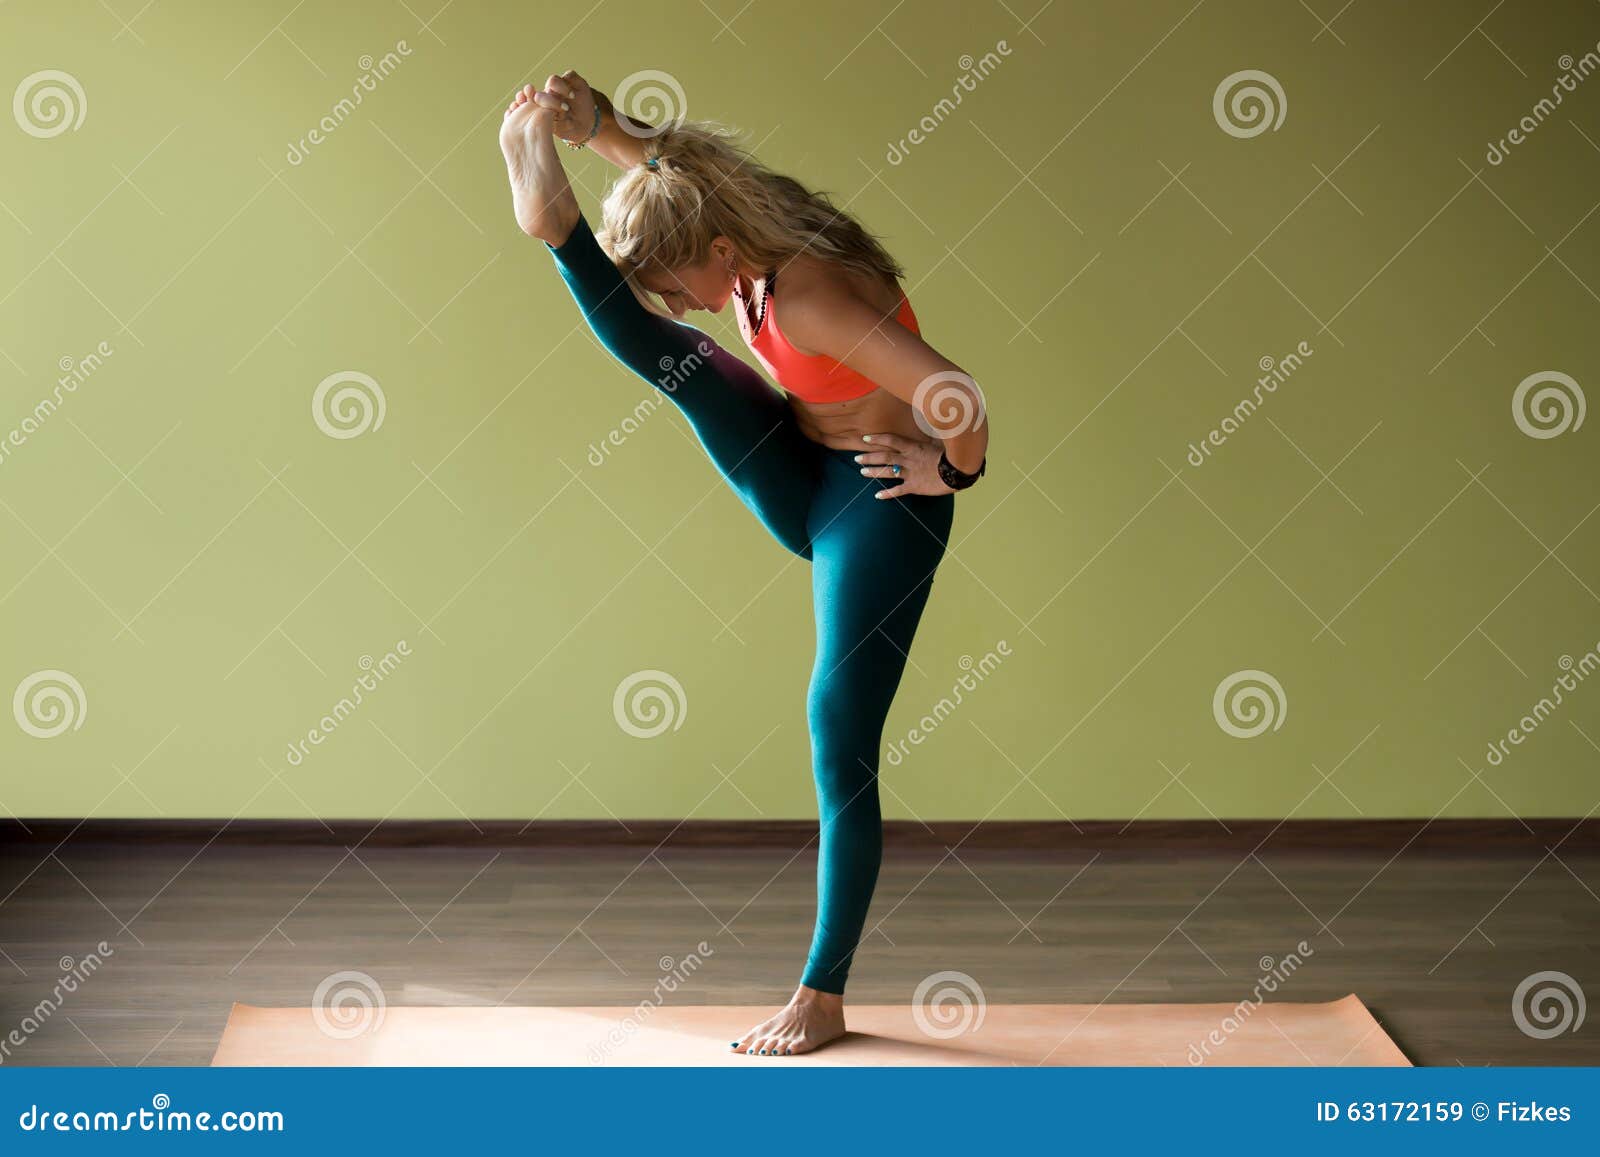 Standing Head Knee Yoga Pose Young Stock Vector (Royalty Free) 2000266715 |  Shutterstock